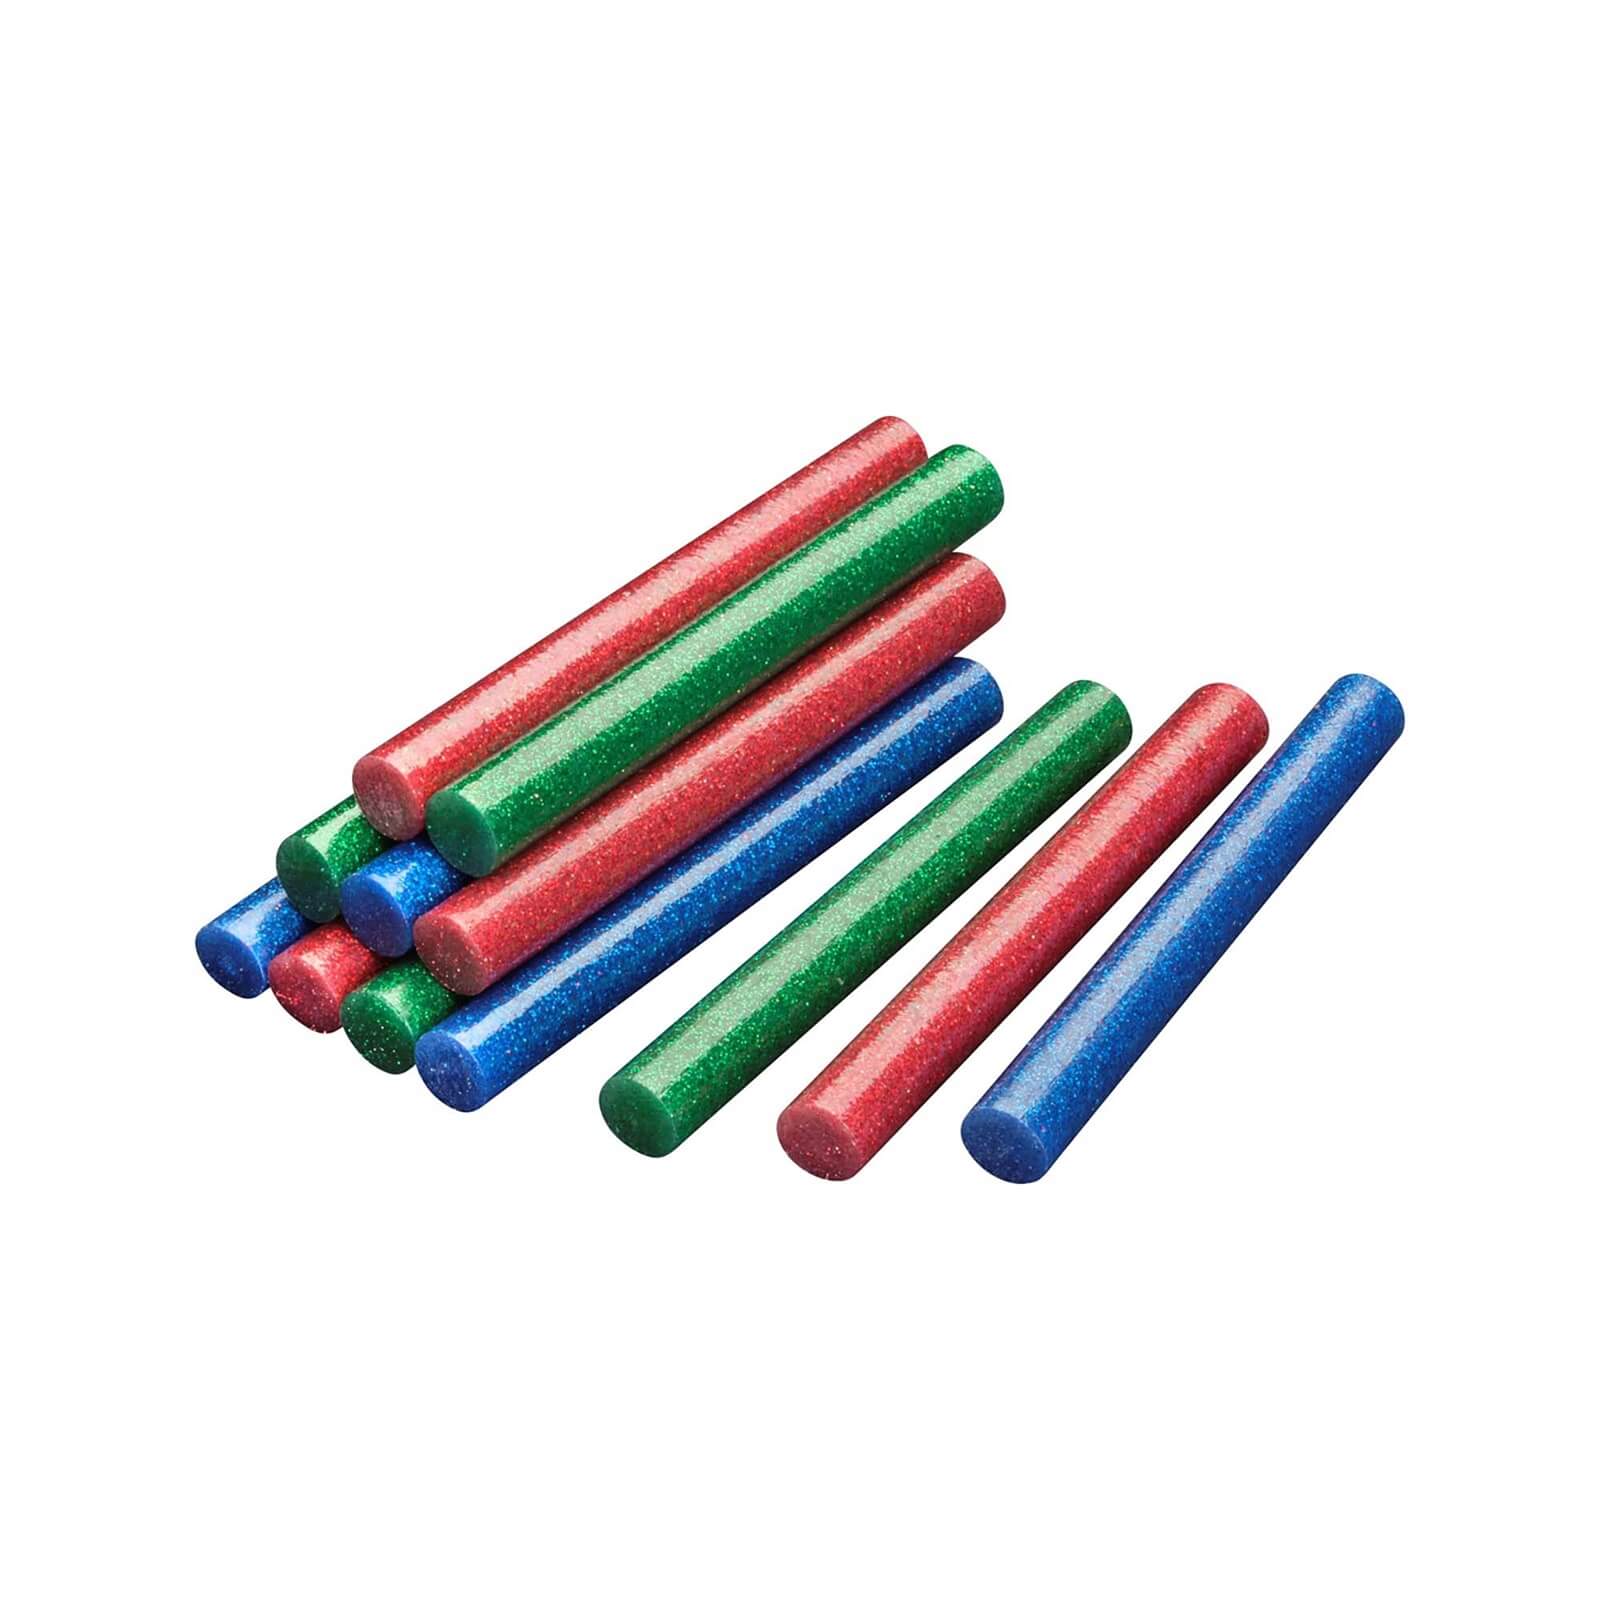 STANLEY Low Temperature Glitter Red/Green/Blue 12x101 mm Glue Sticks - Pack of 12 (STHT1-70436)